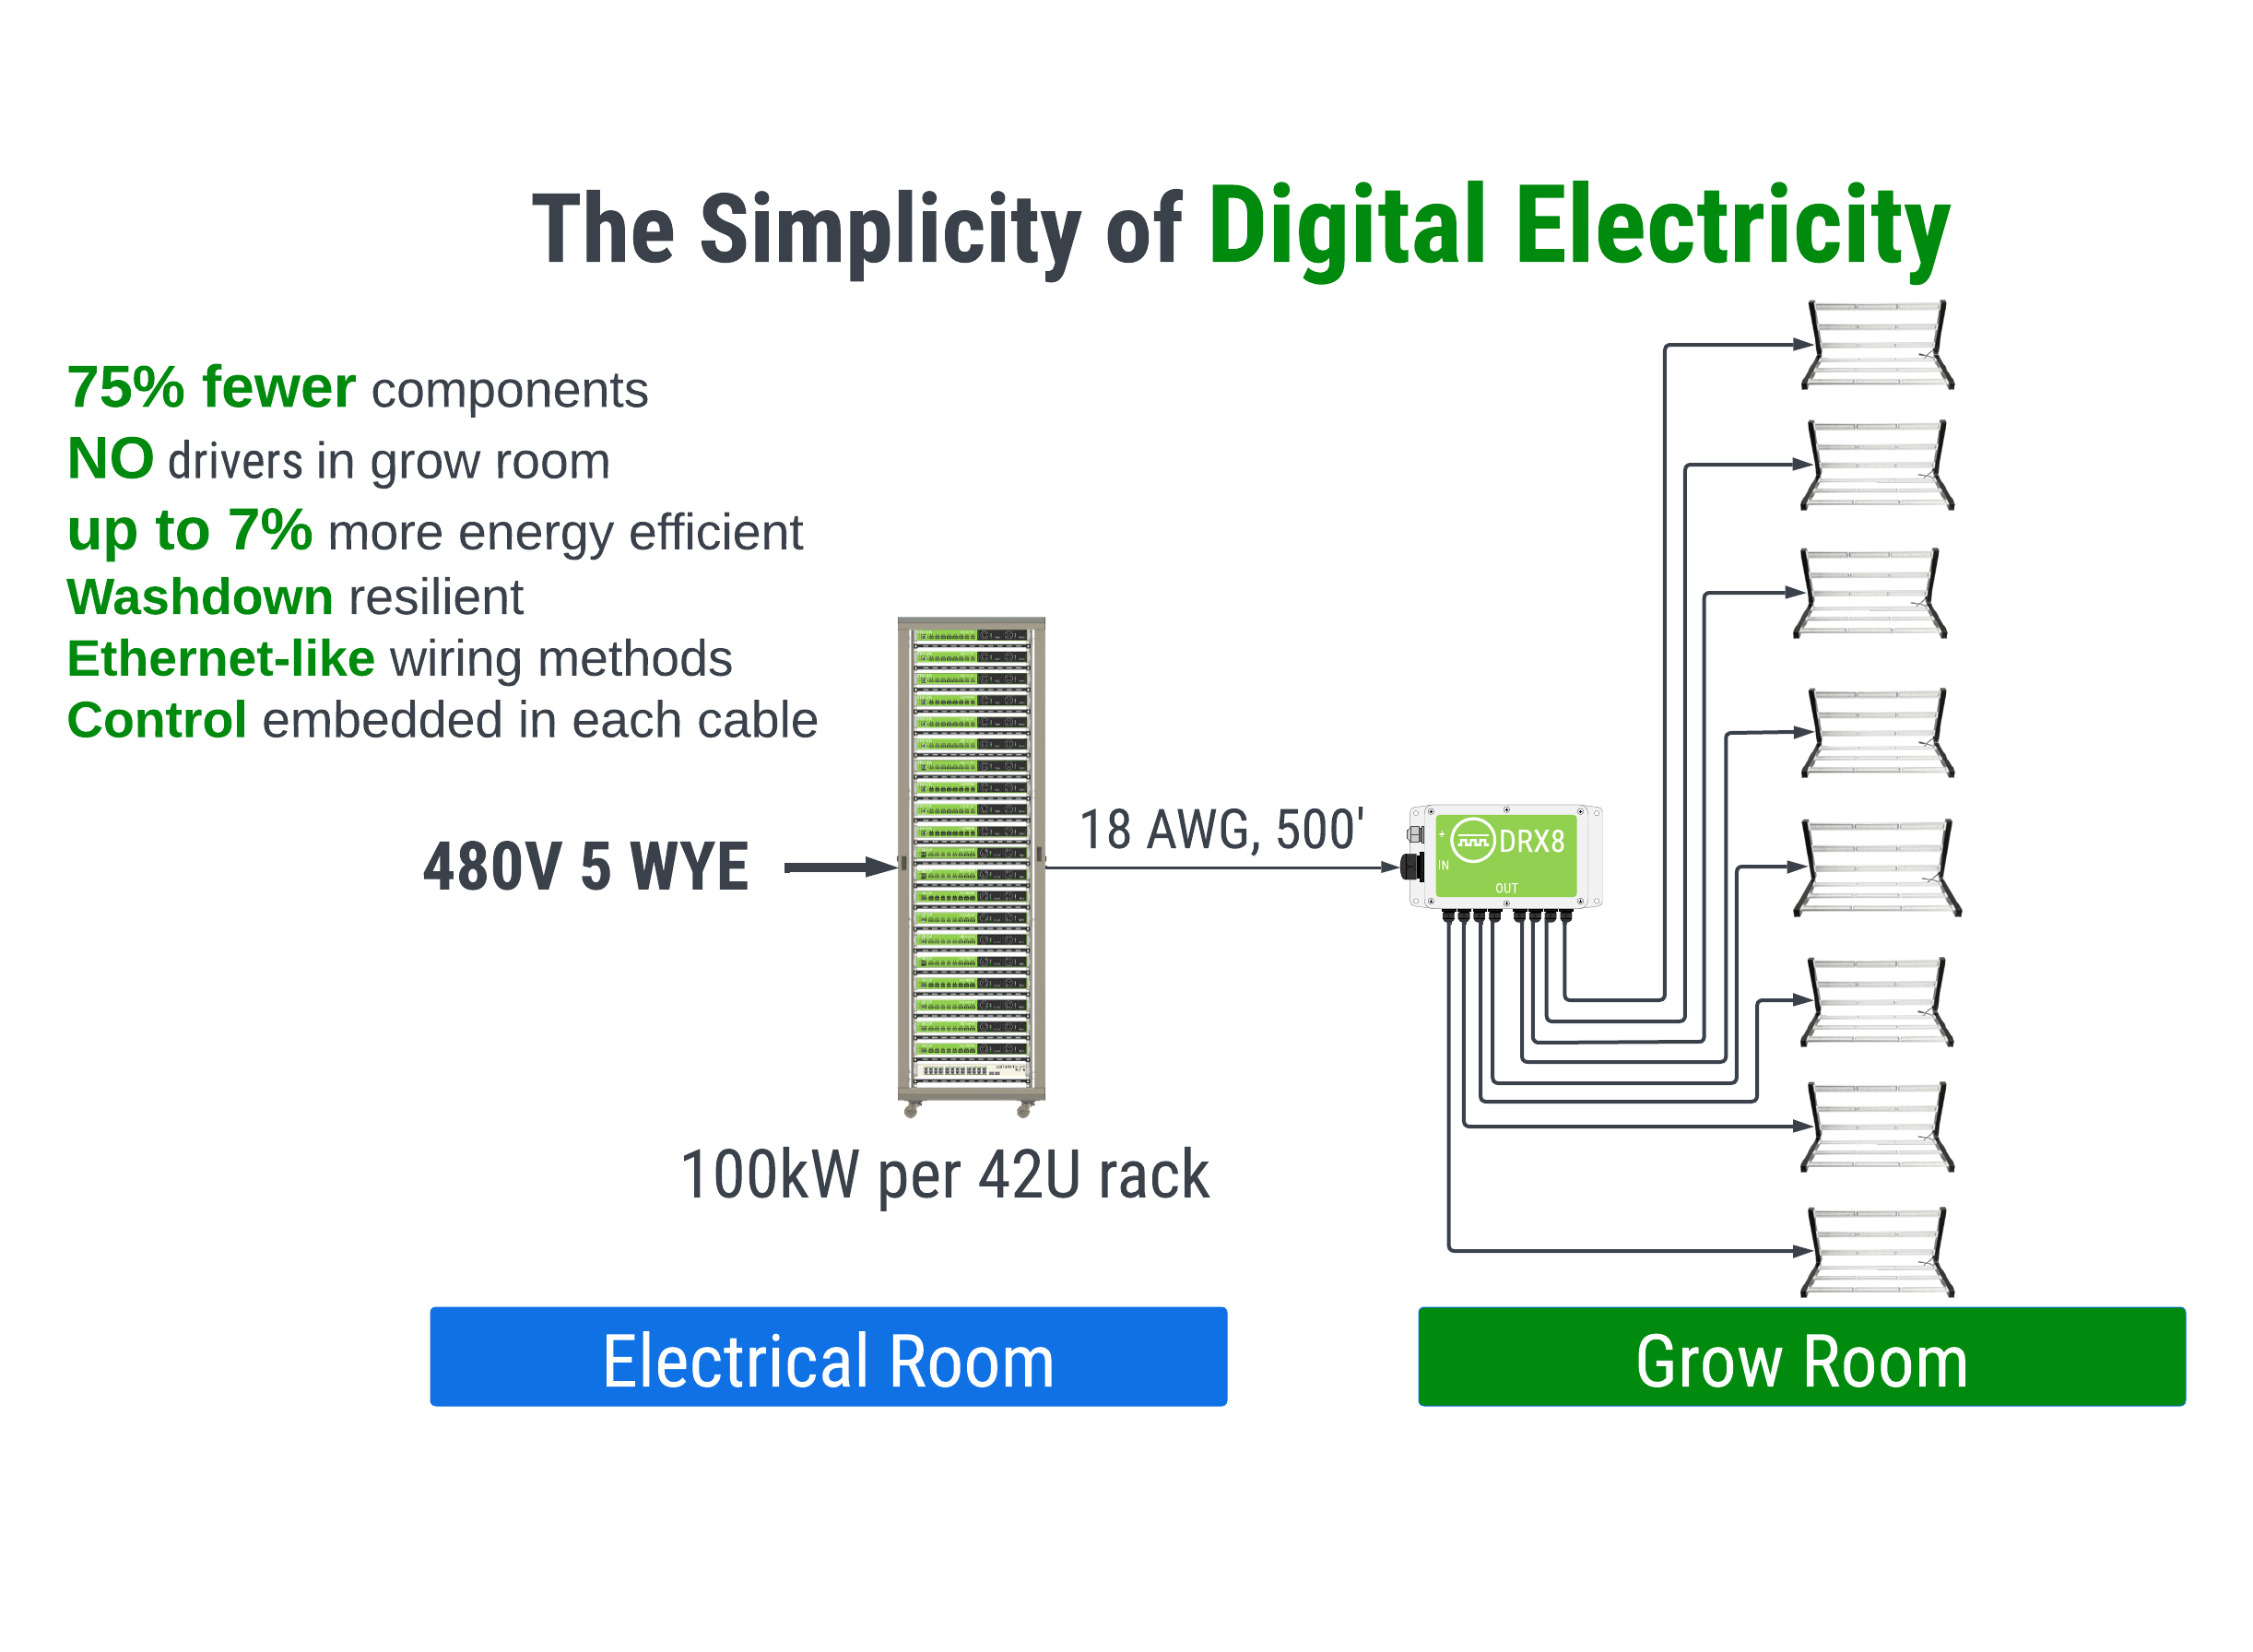 Simplified graph of digital electricity